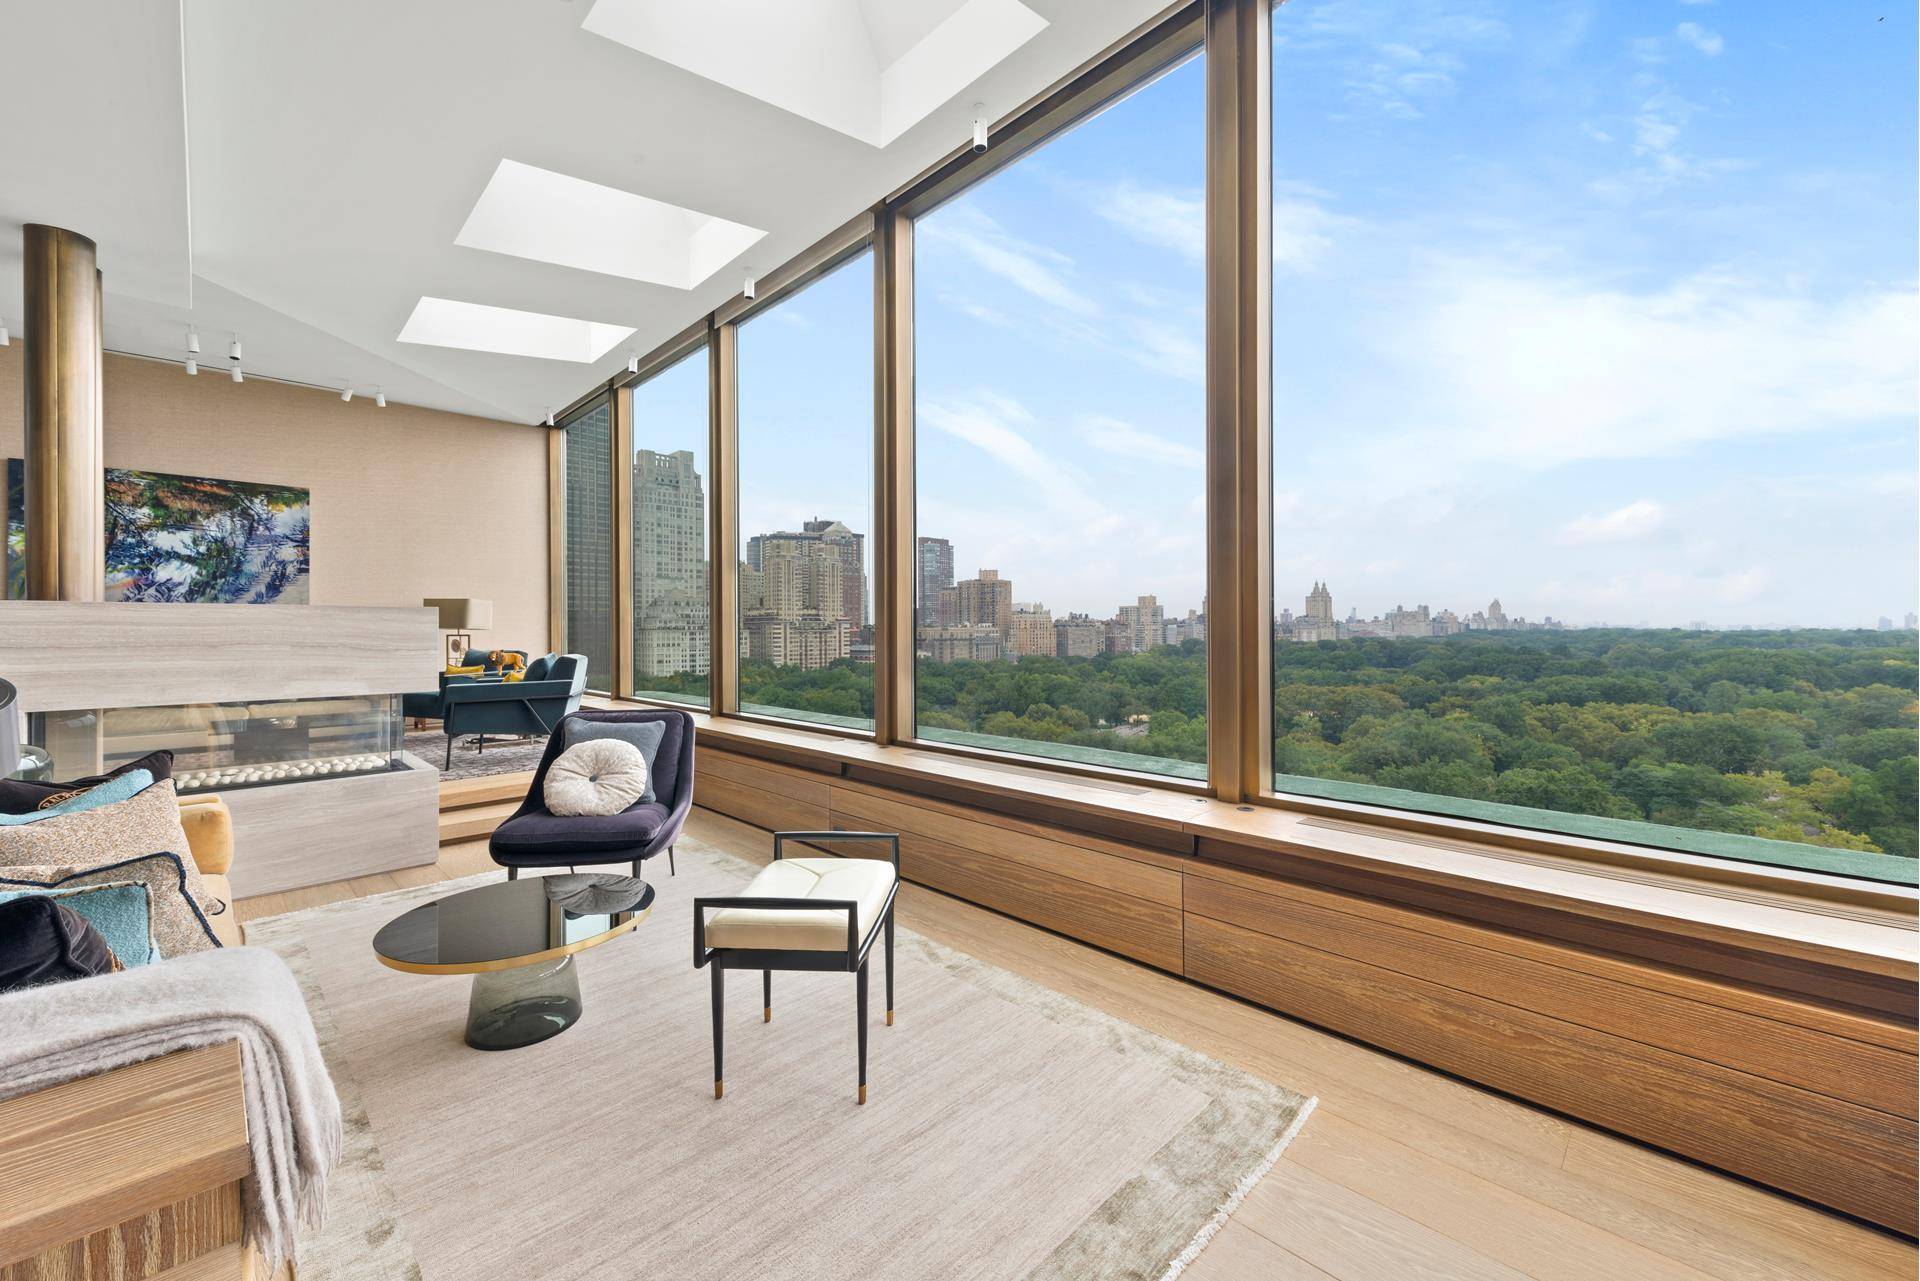 As if owning one exquisitely renovated luxury apartment soaring high above the city weren't enough ; now you have the rare opportunity to own two the fabulous penthouse AND gorgeous ...